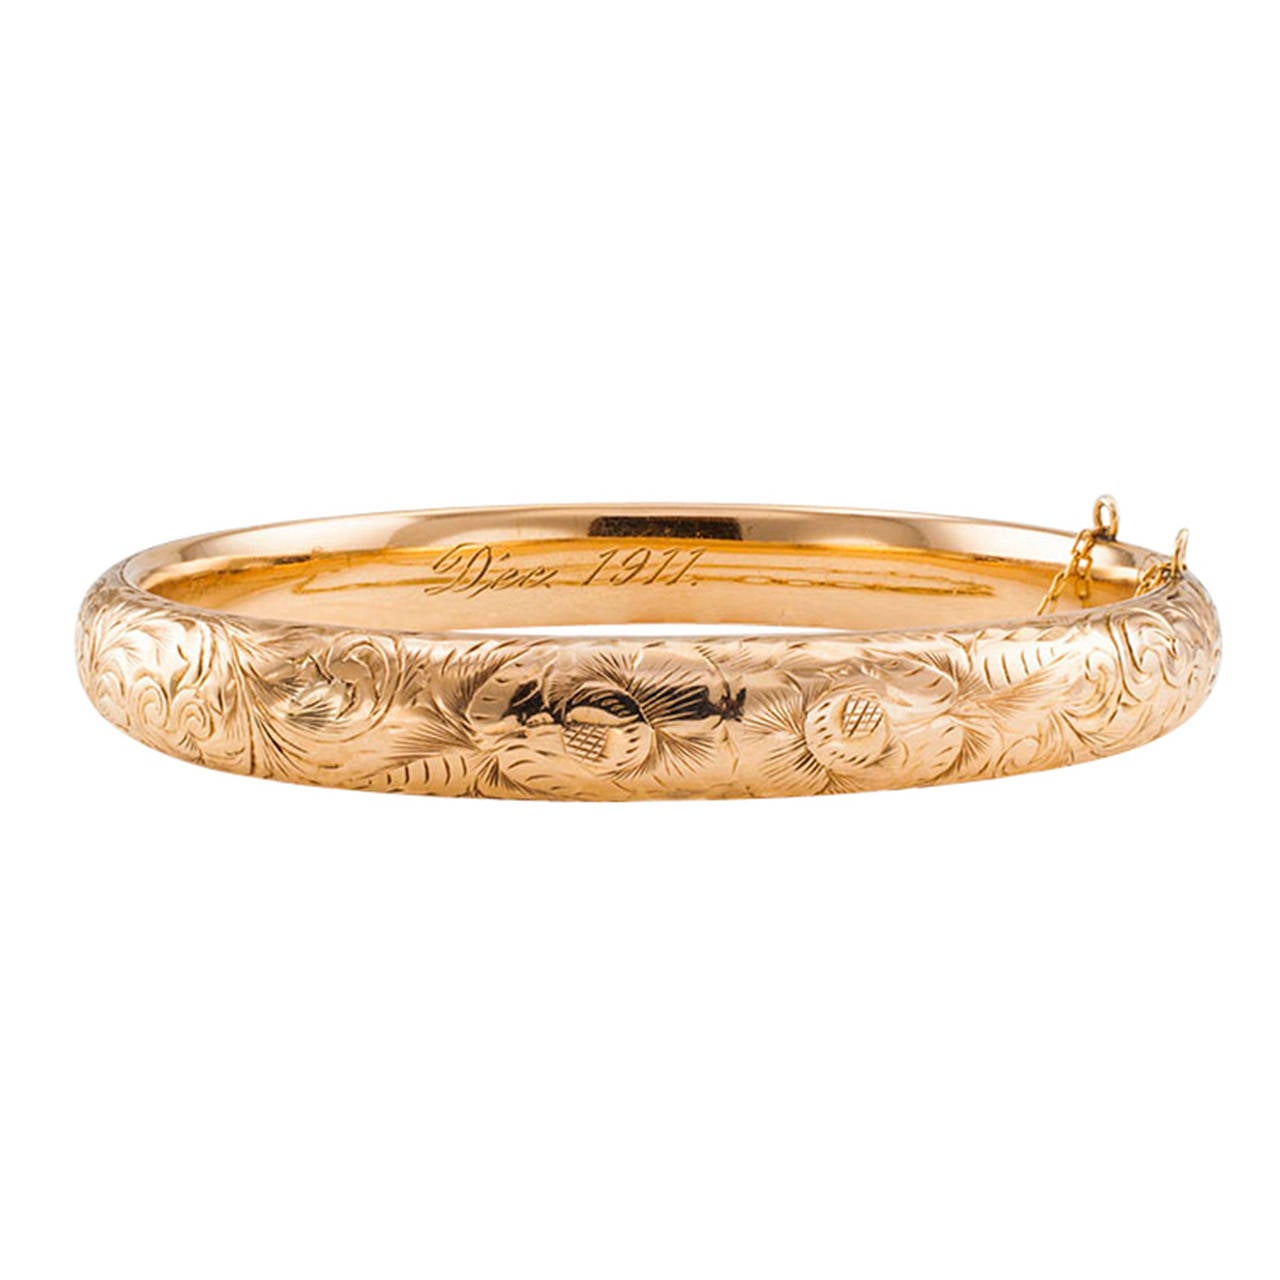 Engraved Antique Gold Bangle Dated 1911

Continuously engraved  with romantic floral motifs, typical of the period, that remain rich and crisp,  the slightly domed hinged bangle resembles a ribbon of flowers, signed WAB for Wordley Alsop and